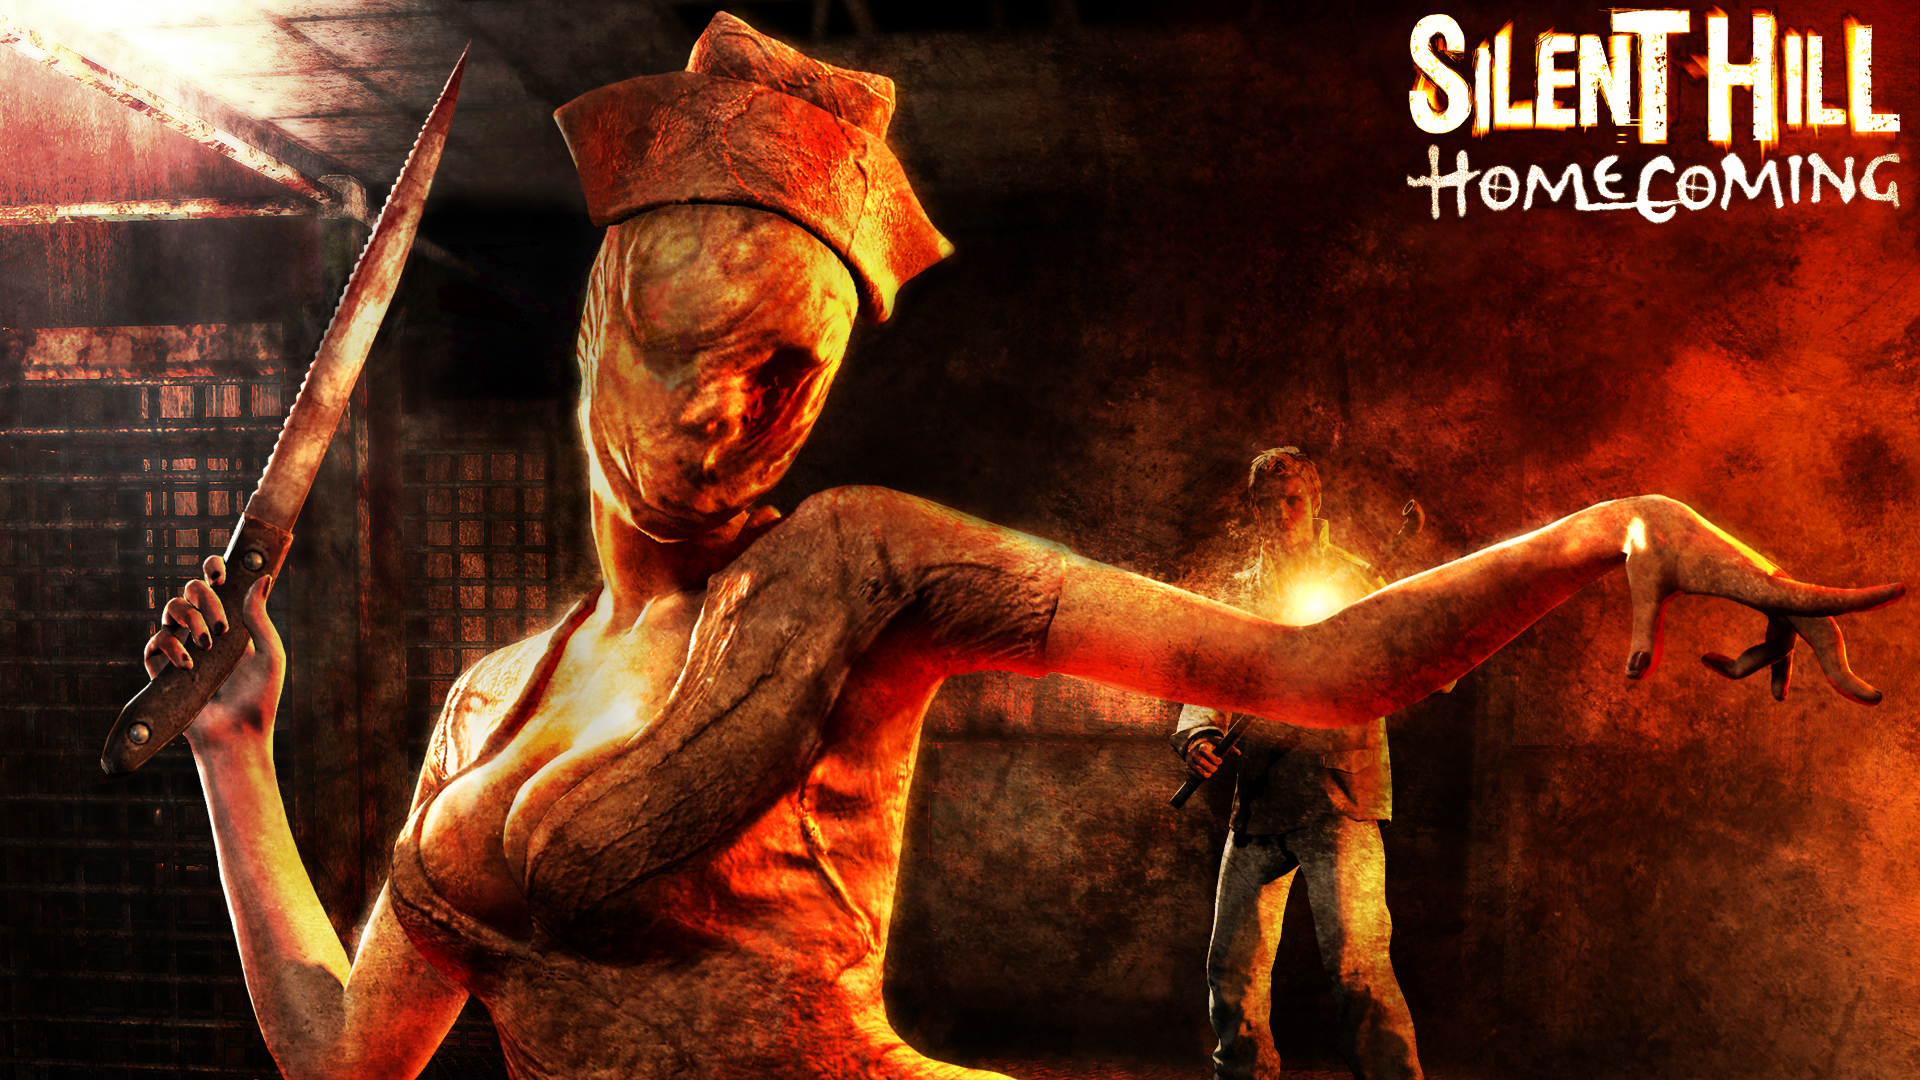 Silent Hill: Homecoming #19